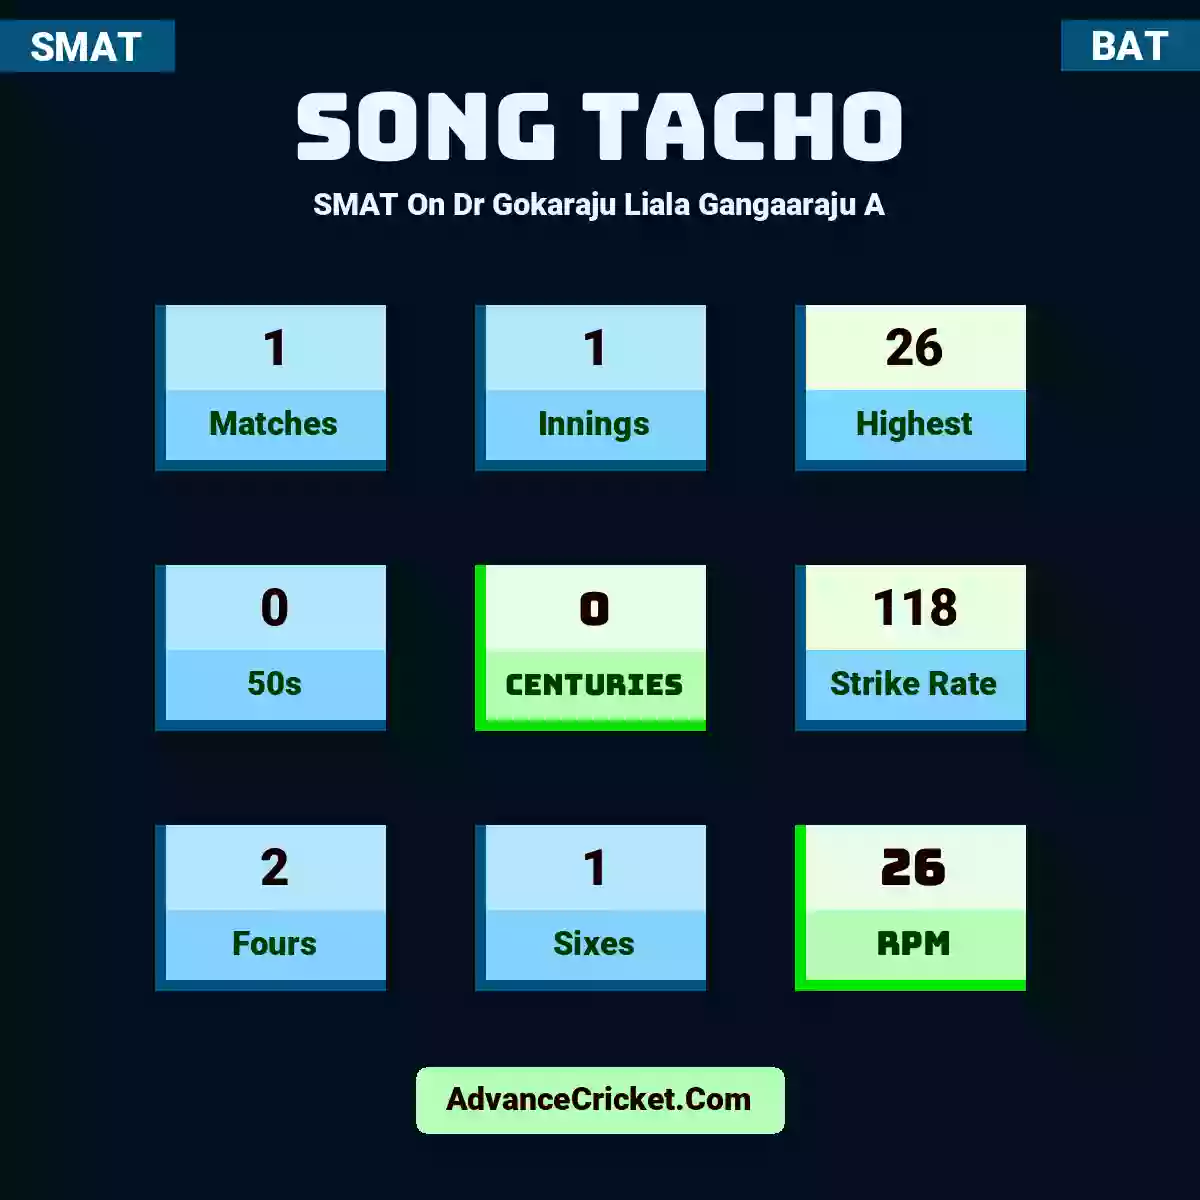 Song Tacho SMAT  On Dr Gokaraju Liala Gangaaraju A, Song Tacho played 1 matches, scored 26 runs as highest, 0 half-centuries, and 0 centuries, with a strike rate of 118. S.Tacho hit 2 fours and 1 sixes, with an RPM of 26.